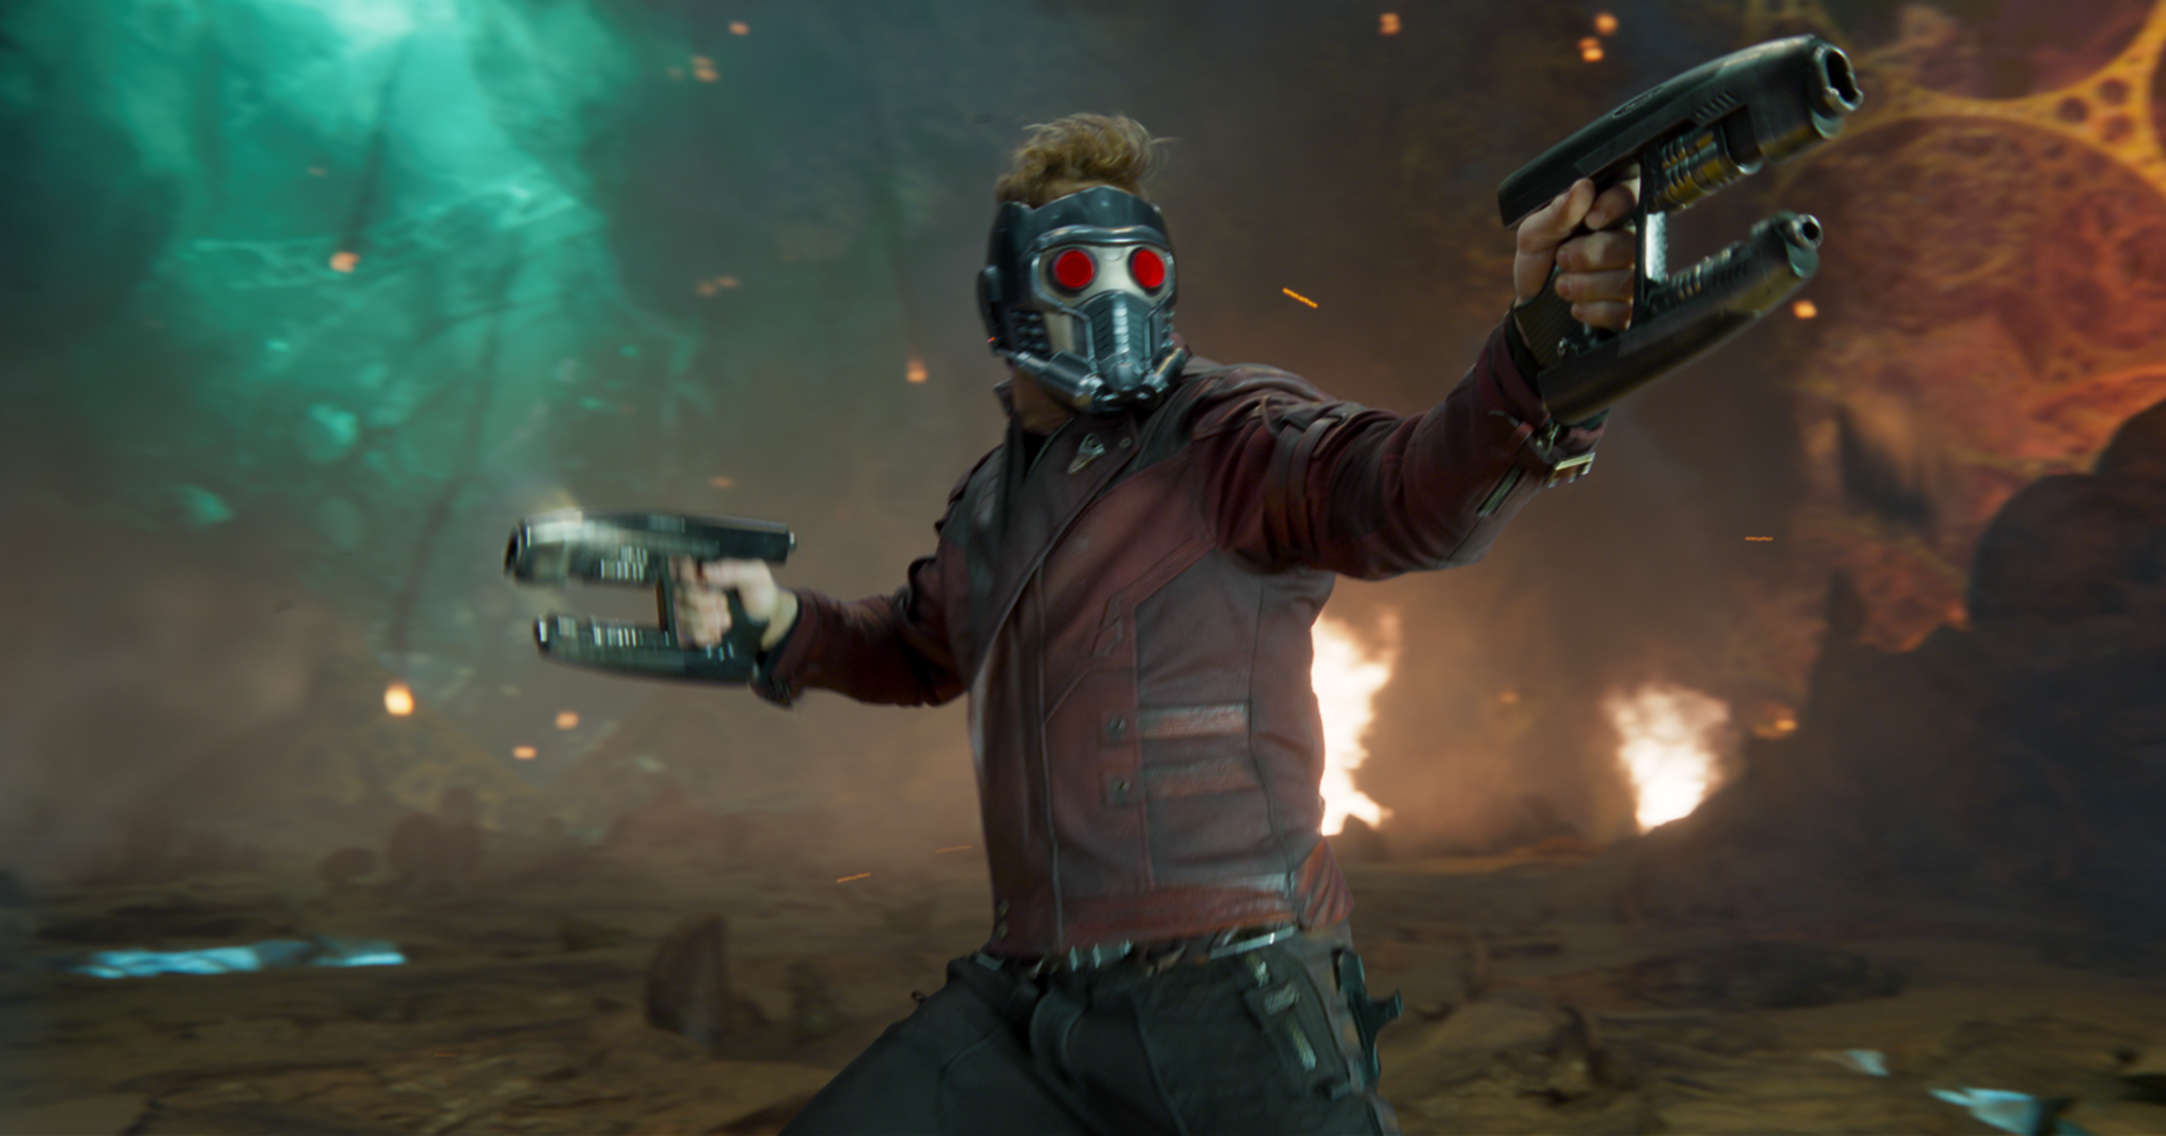 Chris Pratt Tried to Pass on Playing the MCU's Star-Lord - Multiple Times